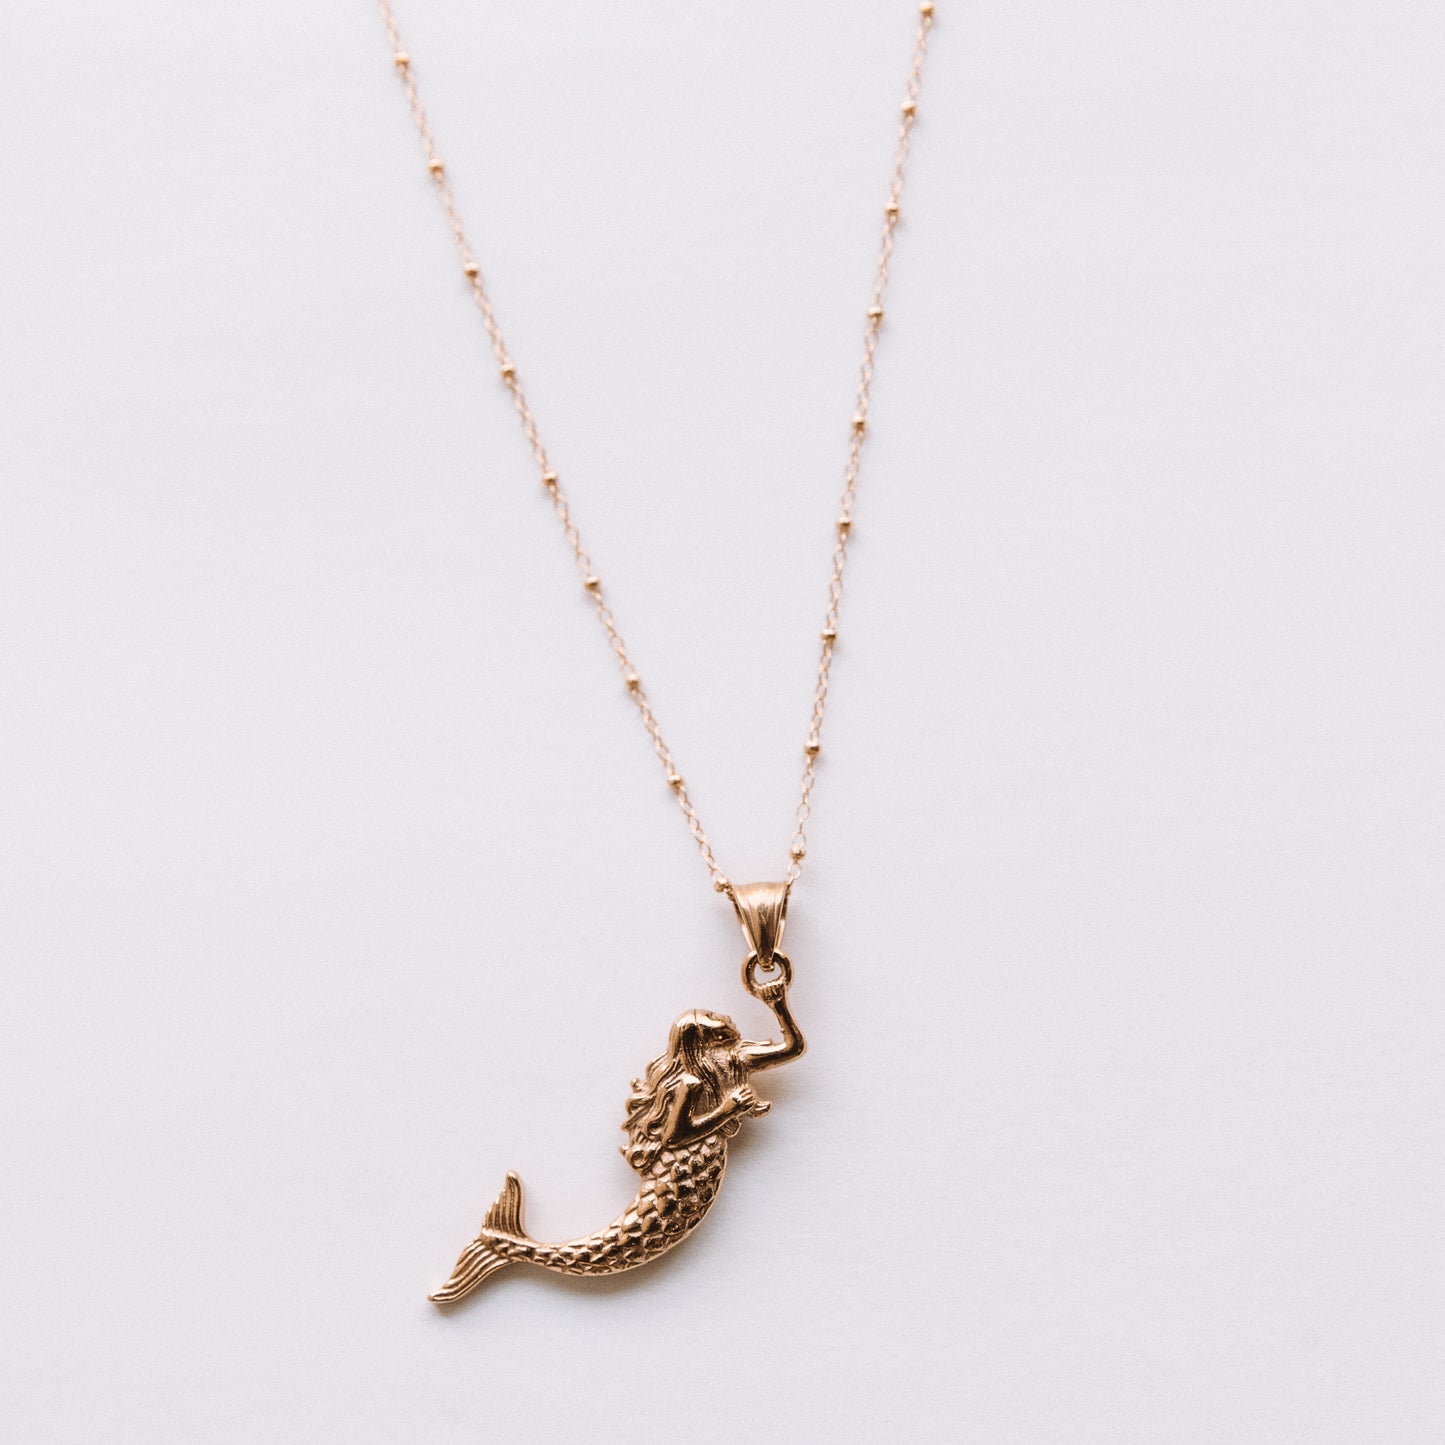 The Mermaid Necklace